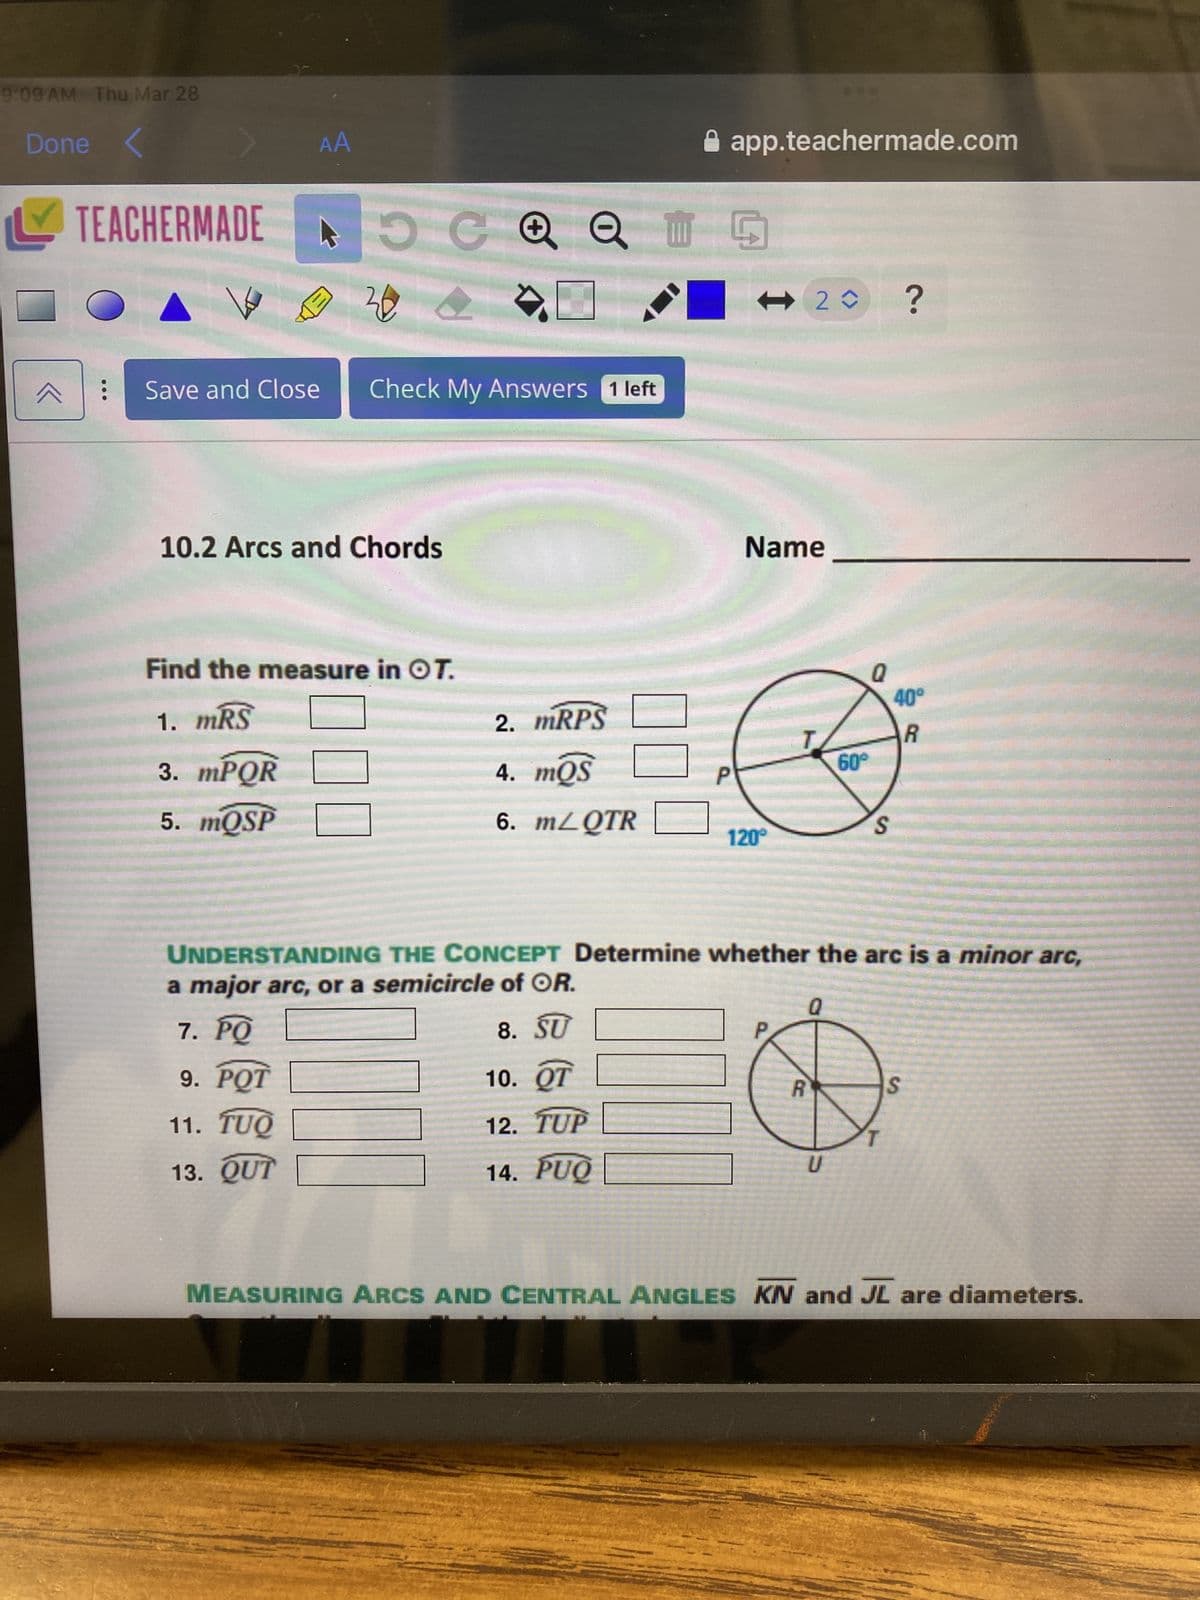 9:09 AM Thu Mar 28
Done
✓ TEACHERMADE
AA
C +
20
Save and Close
Check My Answers 1 left
10.2 Arcs and Chords
⚫ app.teachermade.com
G
<- 2✰ ?
Name
Find the measure in OT.
Q
40°
1. MRS
2. MRPS
R
3. mPQR
4. mQS
60°
P
5. mQSP
6. mZQTR
S
120°
UNDERSTANDING THE CONCEPT Determine whether the arc is a minor arc,
a major arc, or a semicircle of OR.
☐☐
7. PQ
8. SU
9. POT
10. QT
11. TUQ
12. TUP
13. QUT
14. PUQ
Q
P
R
U
S
MEASURING ARCS AND CENTRAL ANGLES KN and JL are diameters.